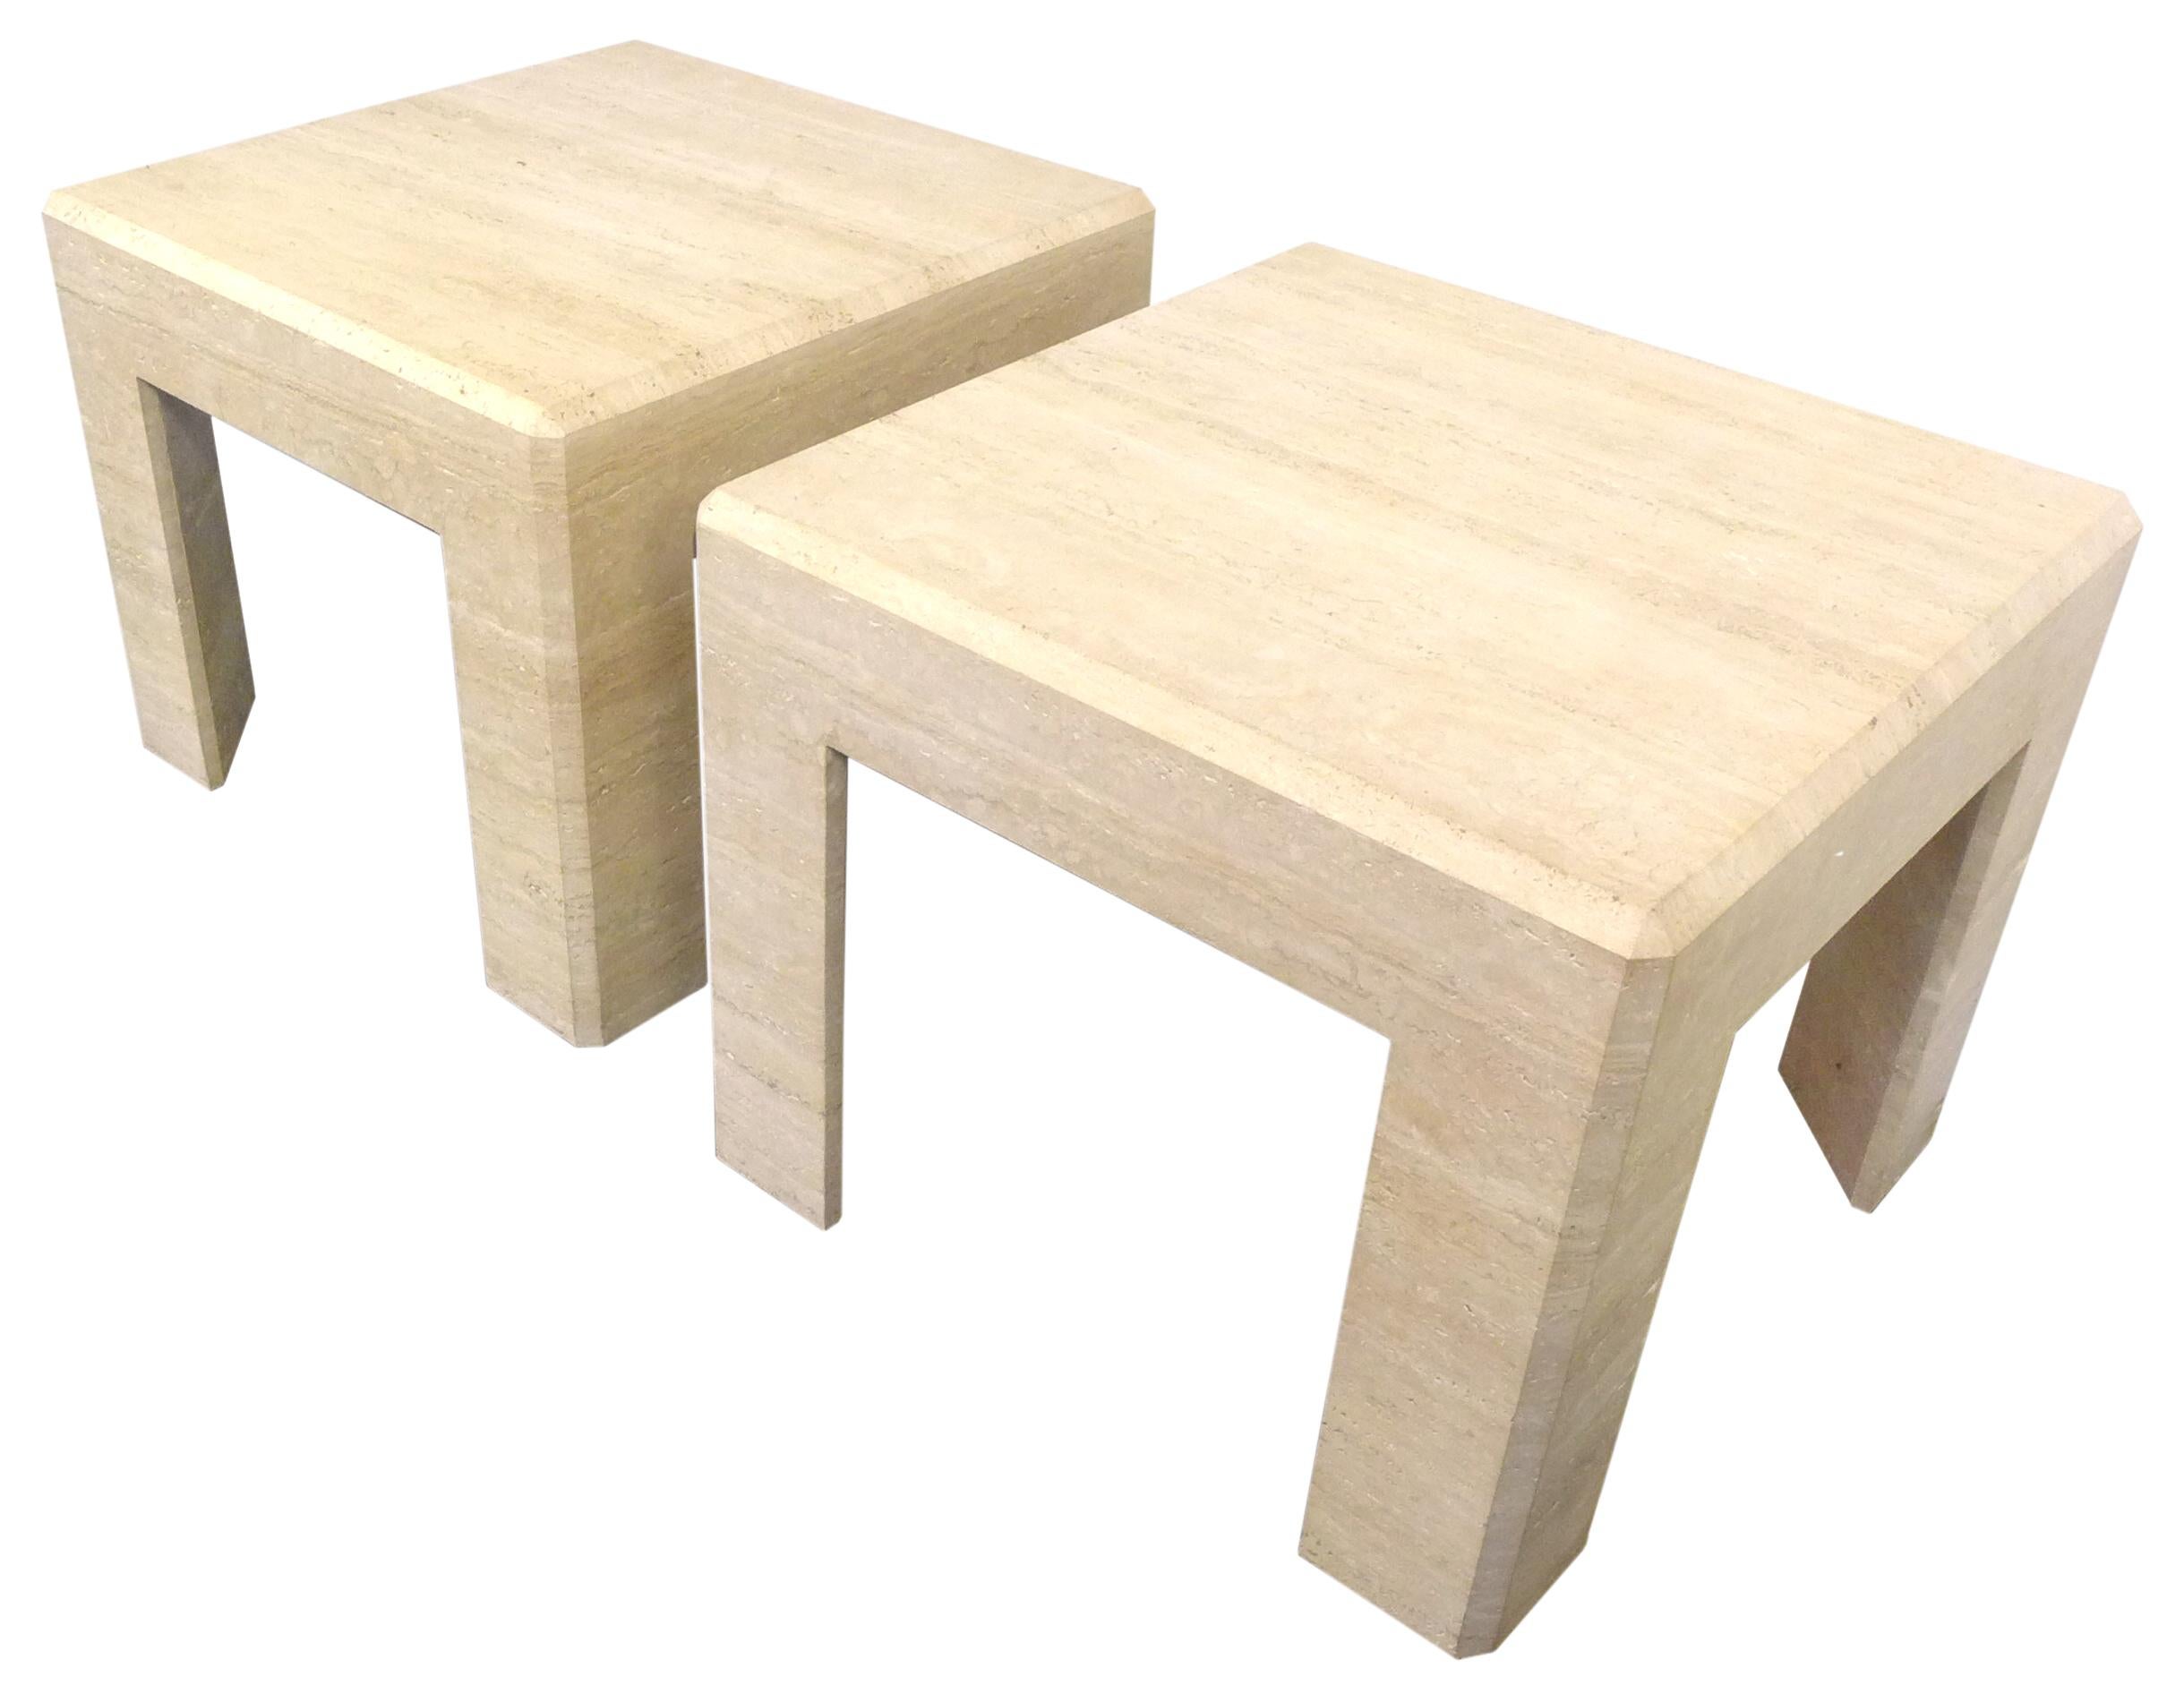 A fantastic pair of travertine side tables. Eye-catching, modern forms of great proportion and subtle detail. Though hollow underneath, mitered travertine slabs built to imply one massive structure with a decorative bevel along the top